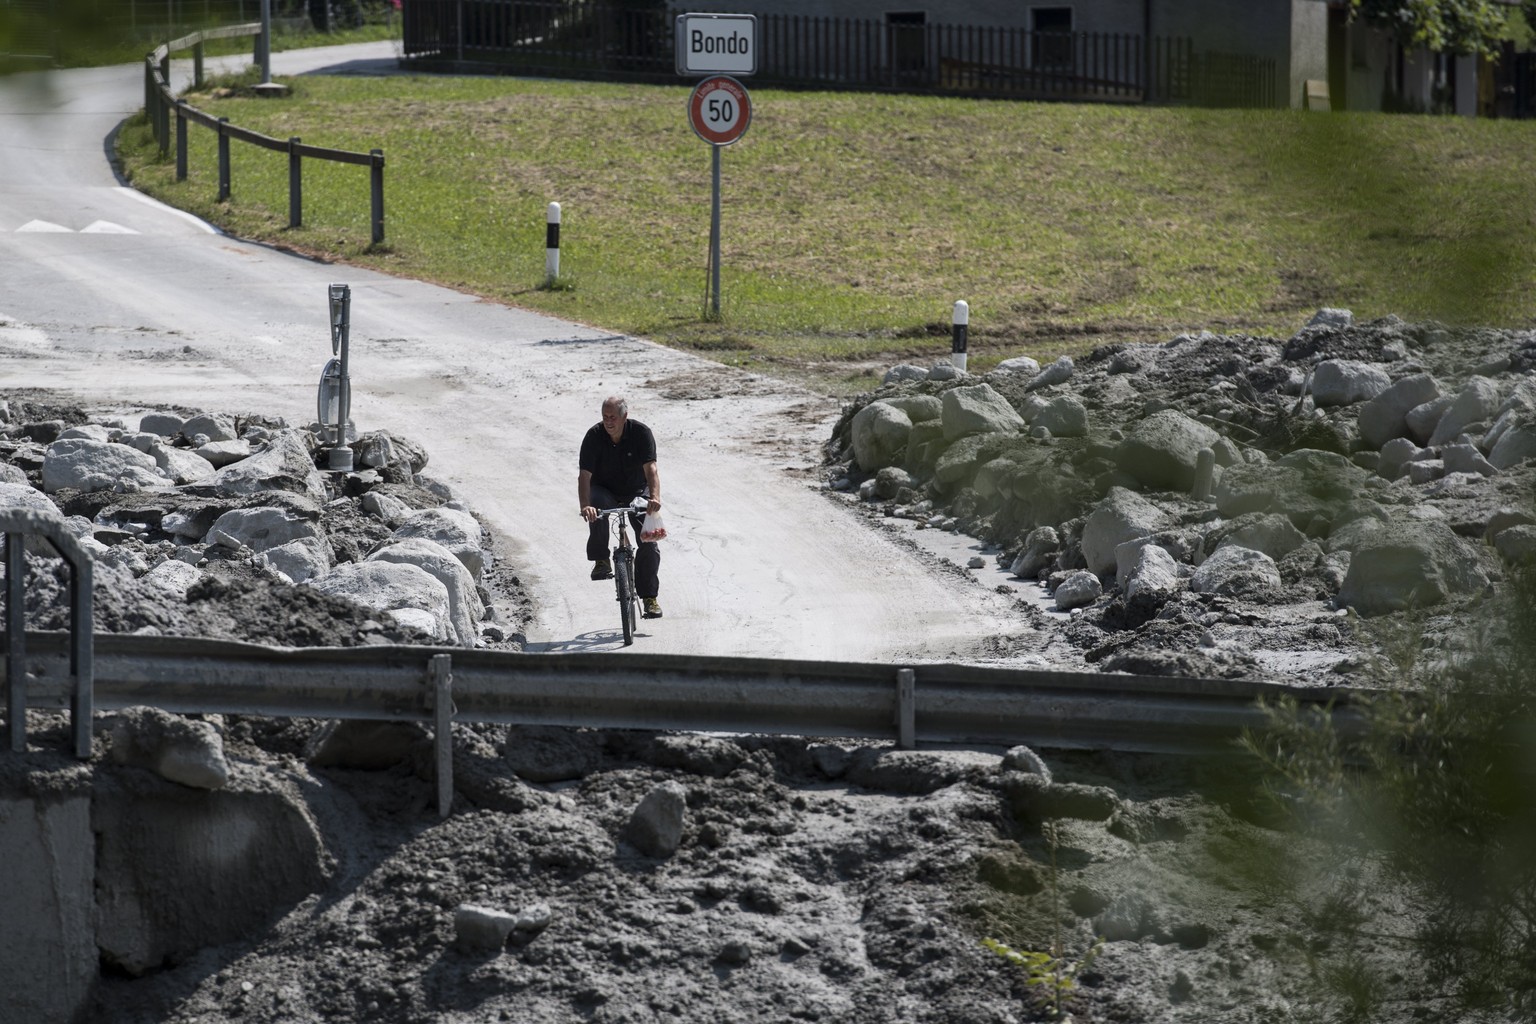 epa06161921 A man rides his bike in Bondo, Graubuenden in southern Switzerland, 25 August 2017. The village had been hit by a massive landslide on Wednesday. The main road between Stampa and Castasegn ...